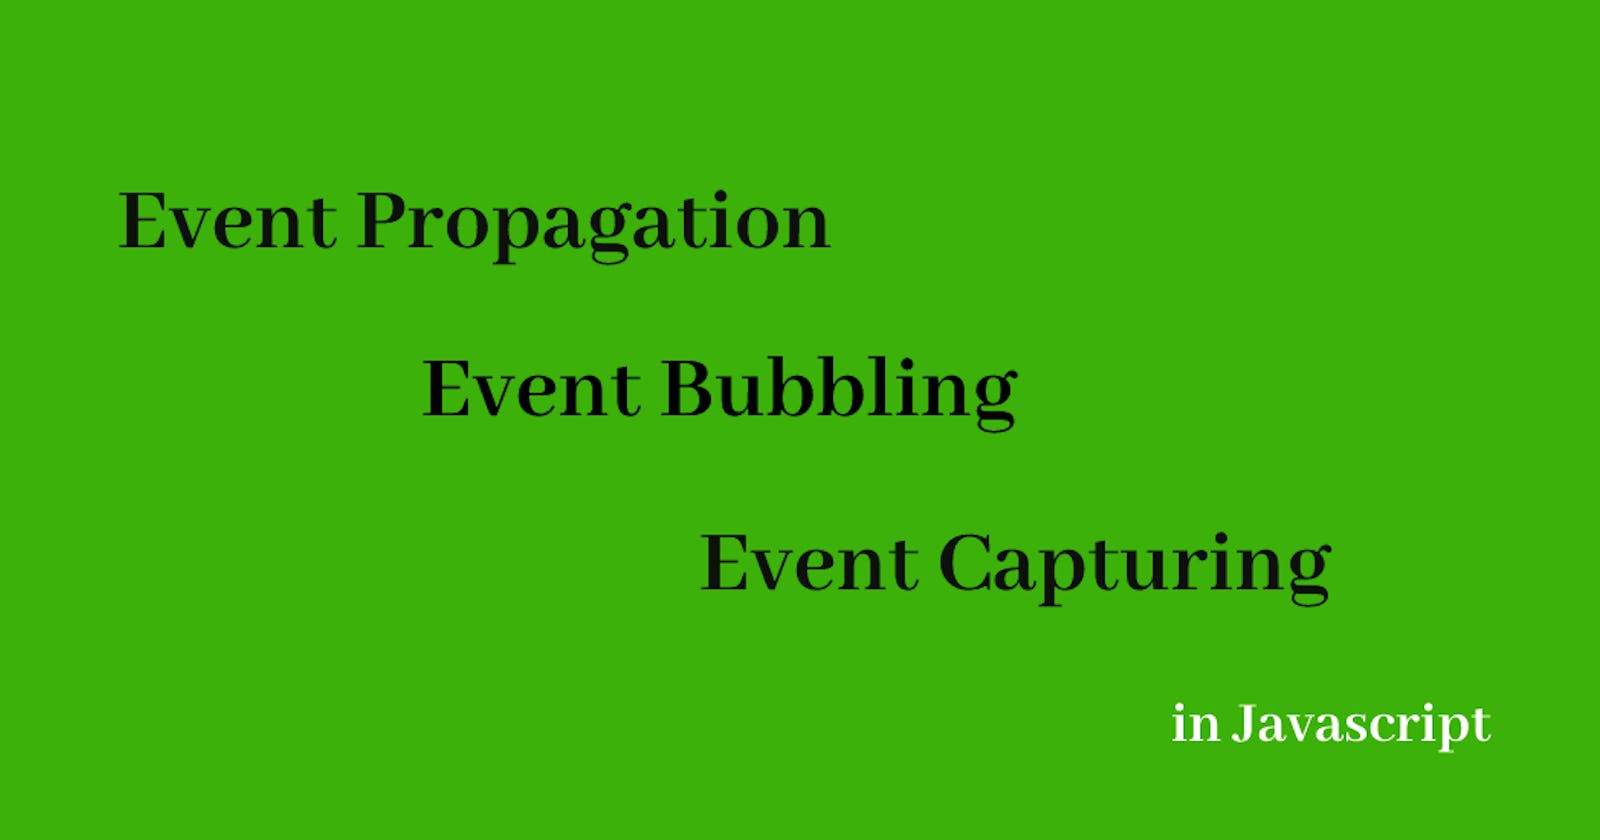 What is Event Propagation, Event Bubbling & Event Capturing